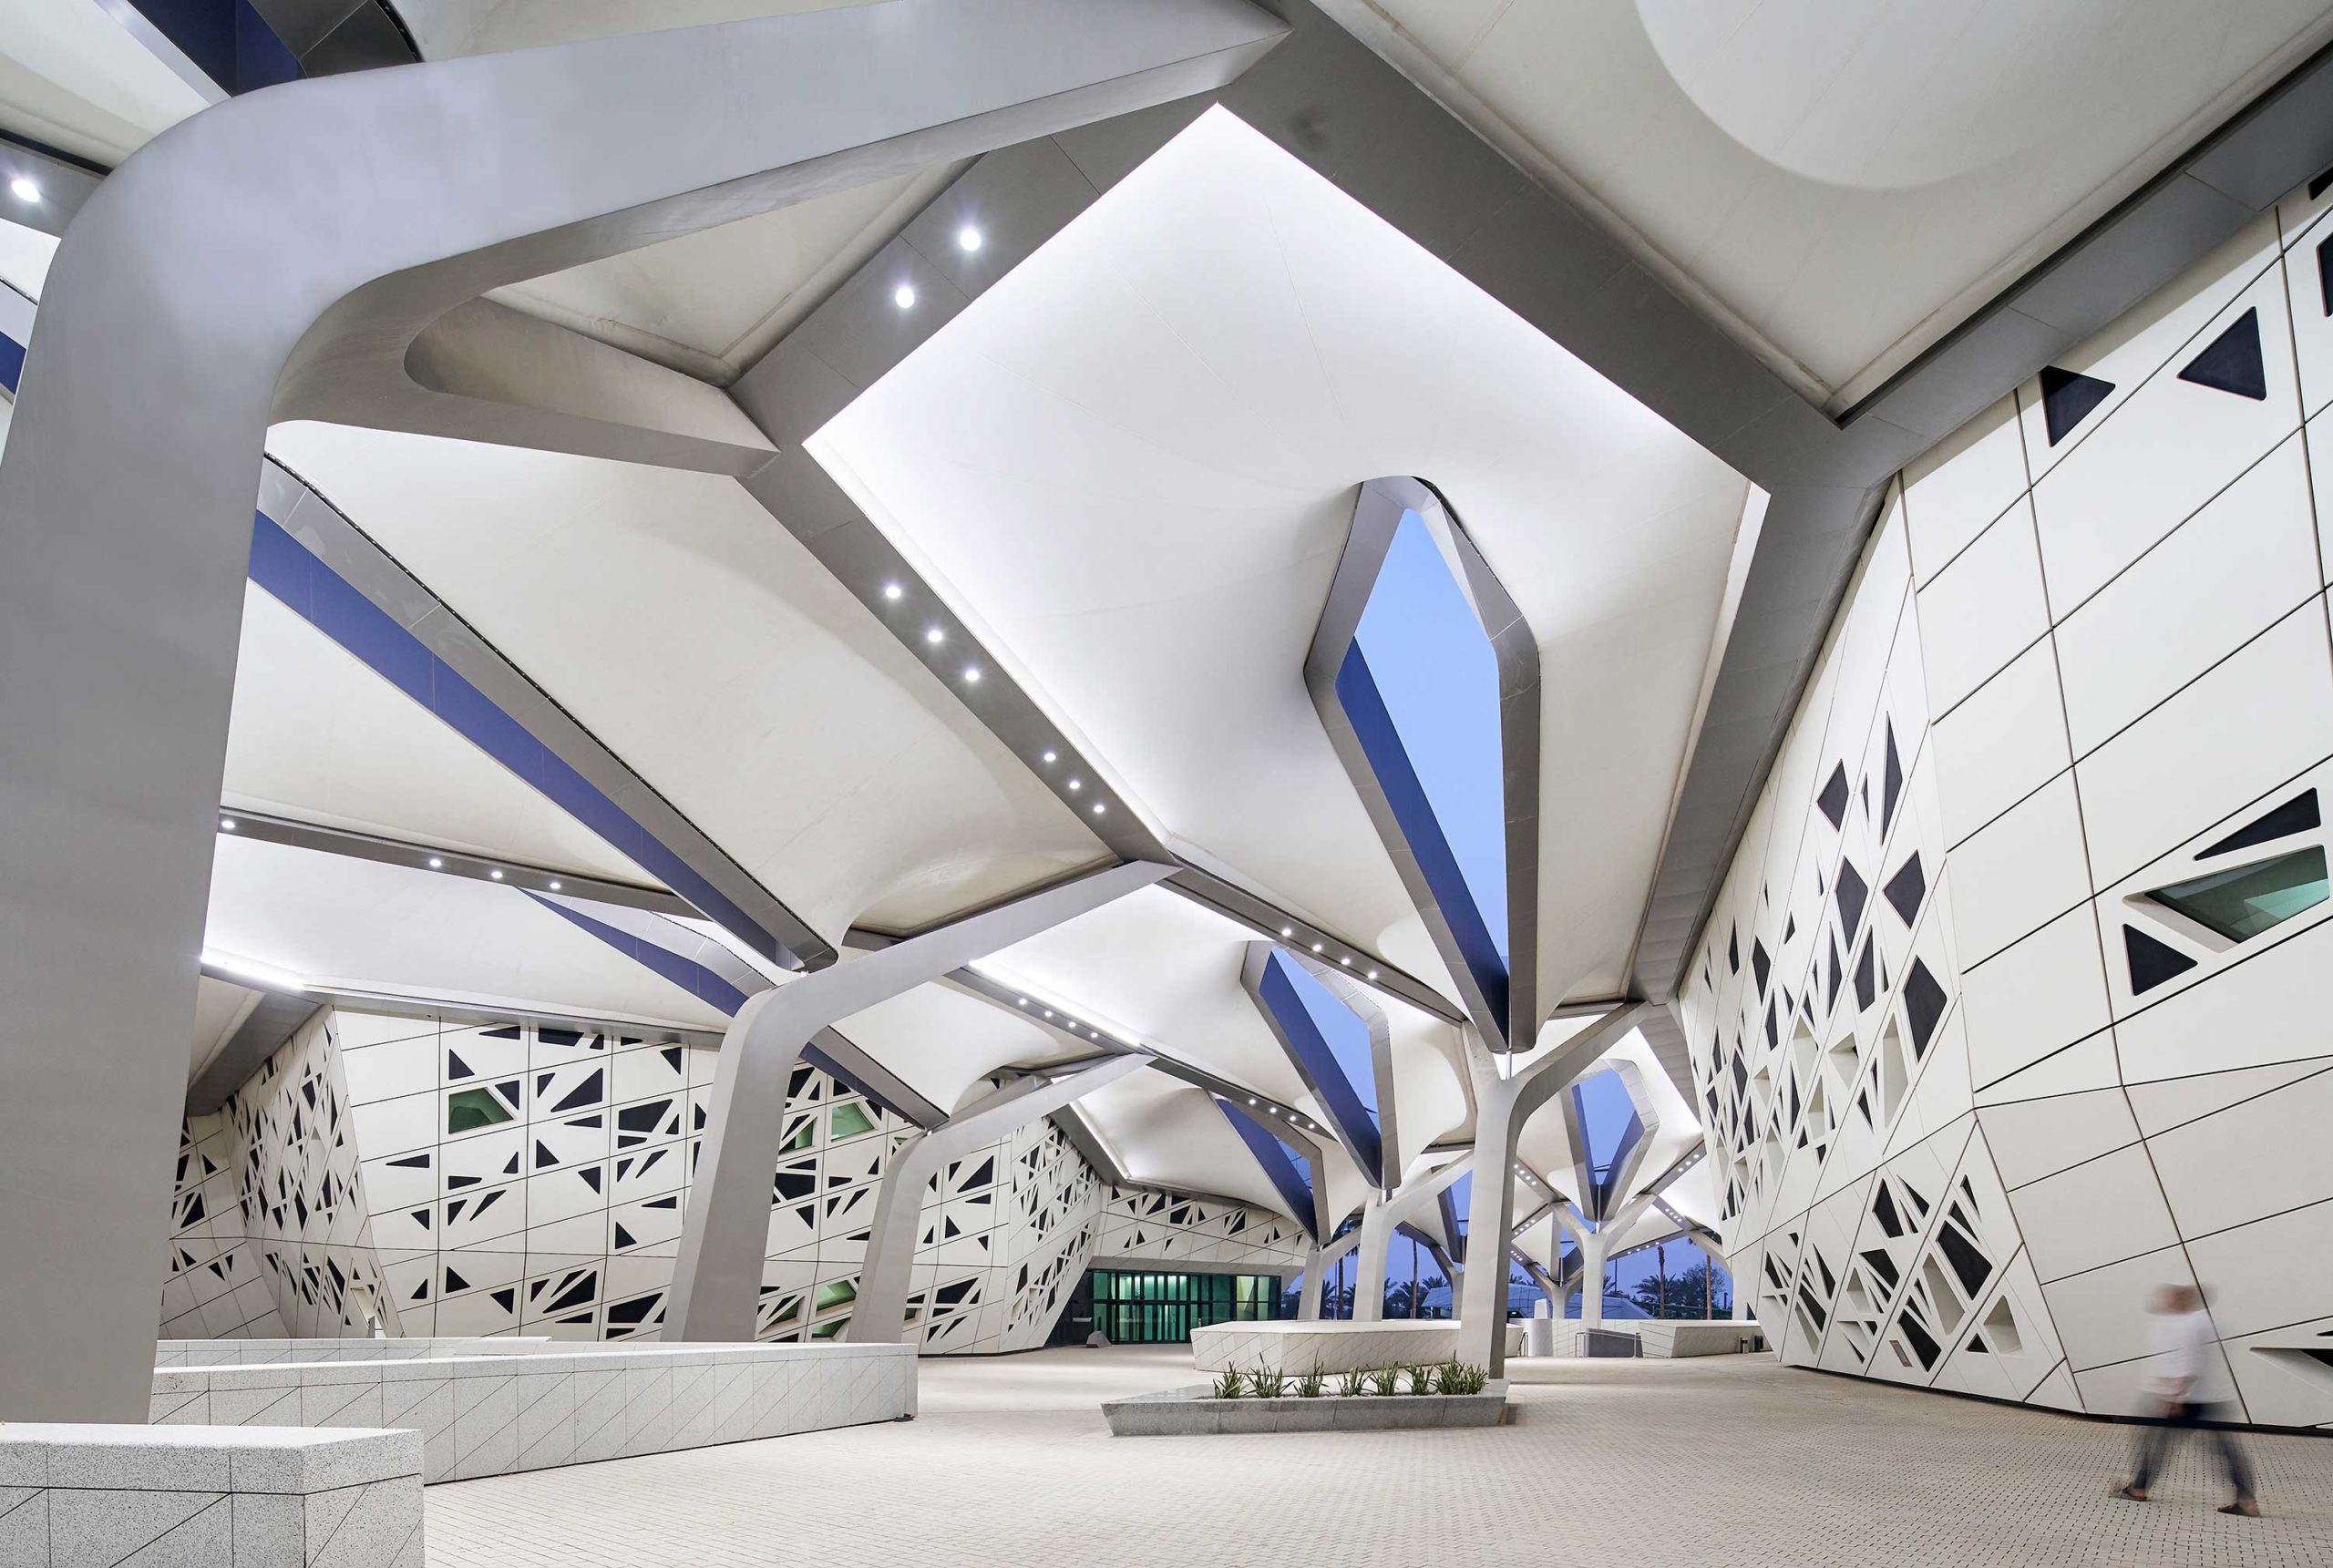 King Abdullah Petroleum Studies and Research Centre by Zaha Hadid Architects